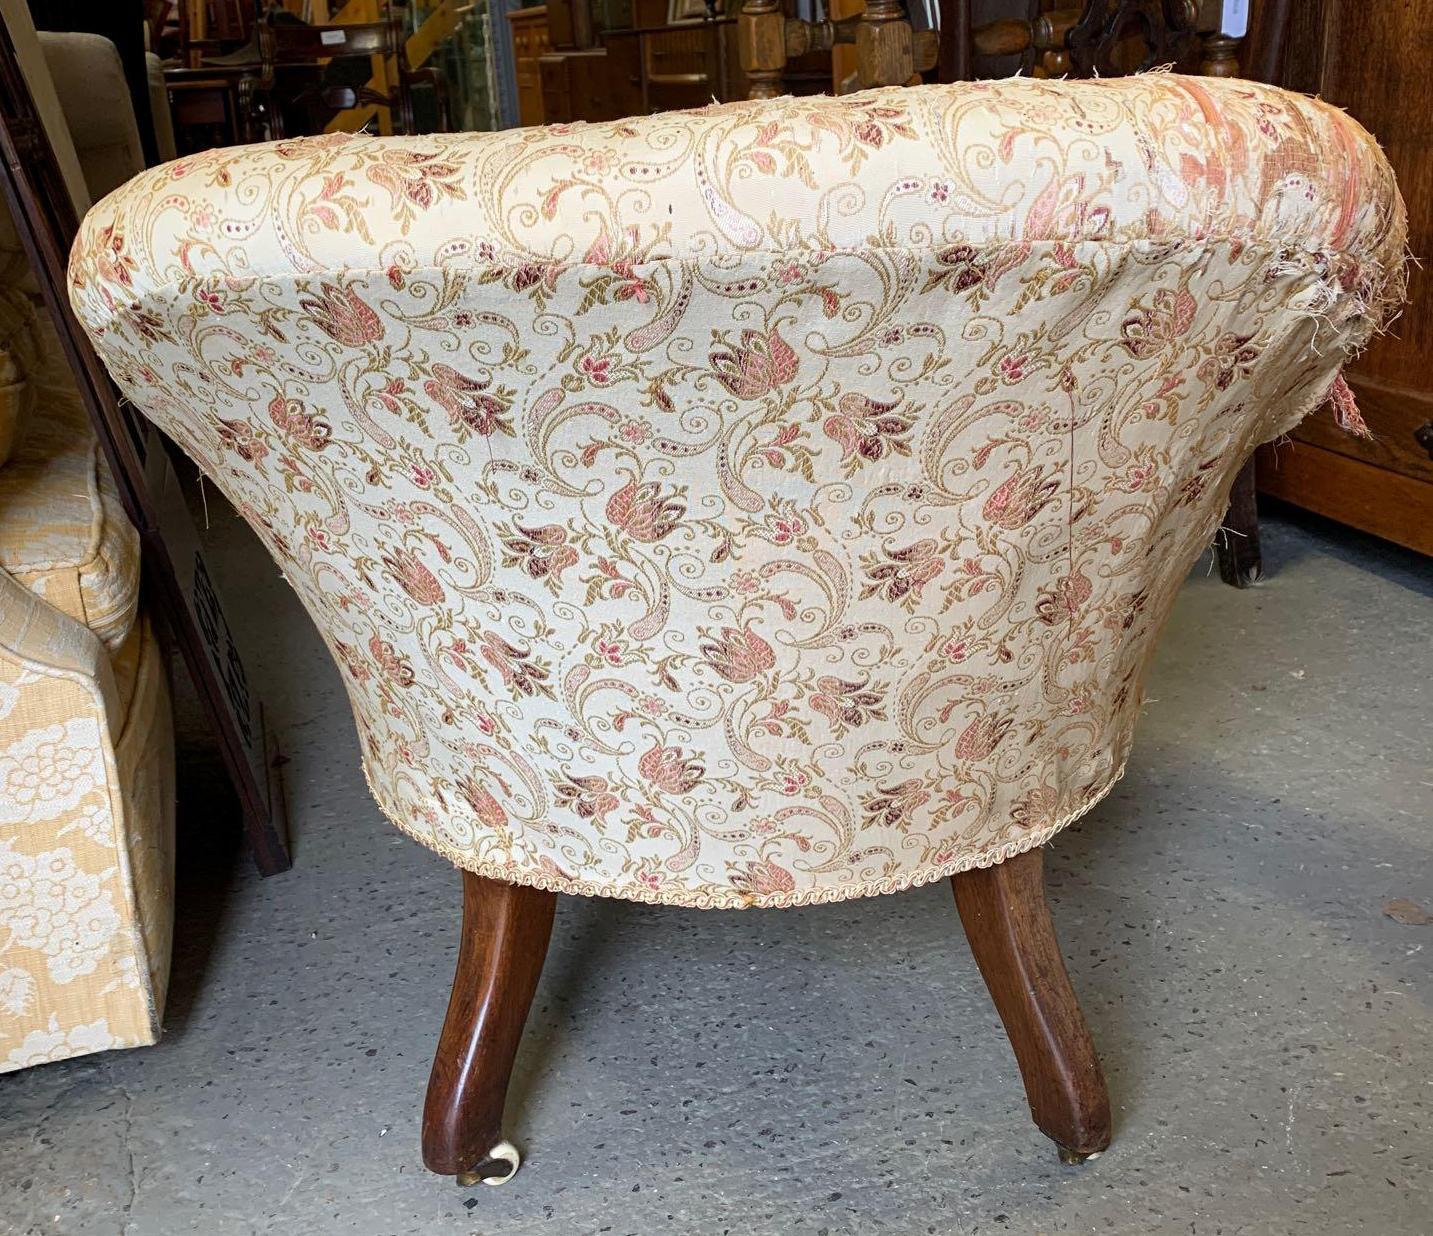 VICTORIAN BUTTON BACK CHAIR - Image 3 of 3